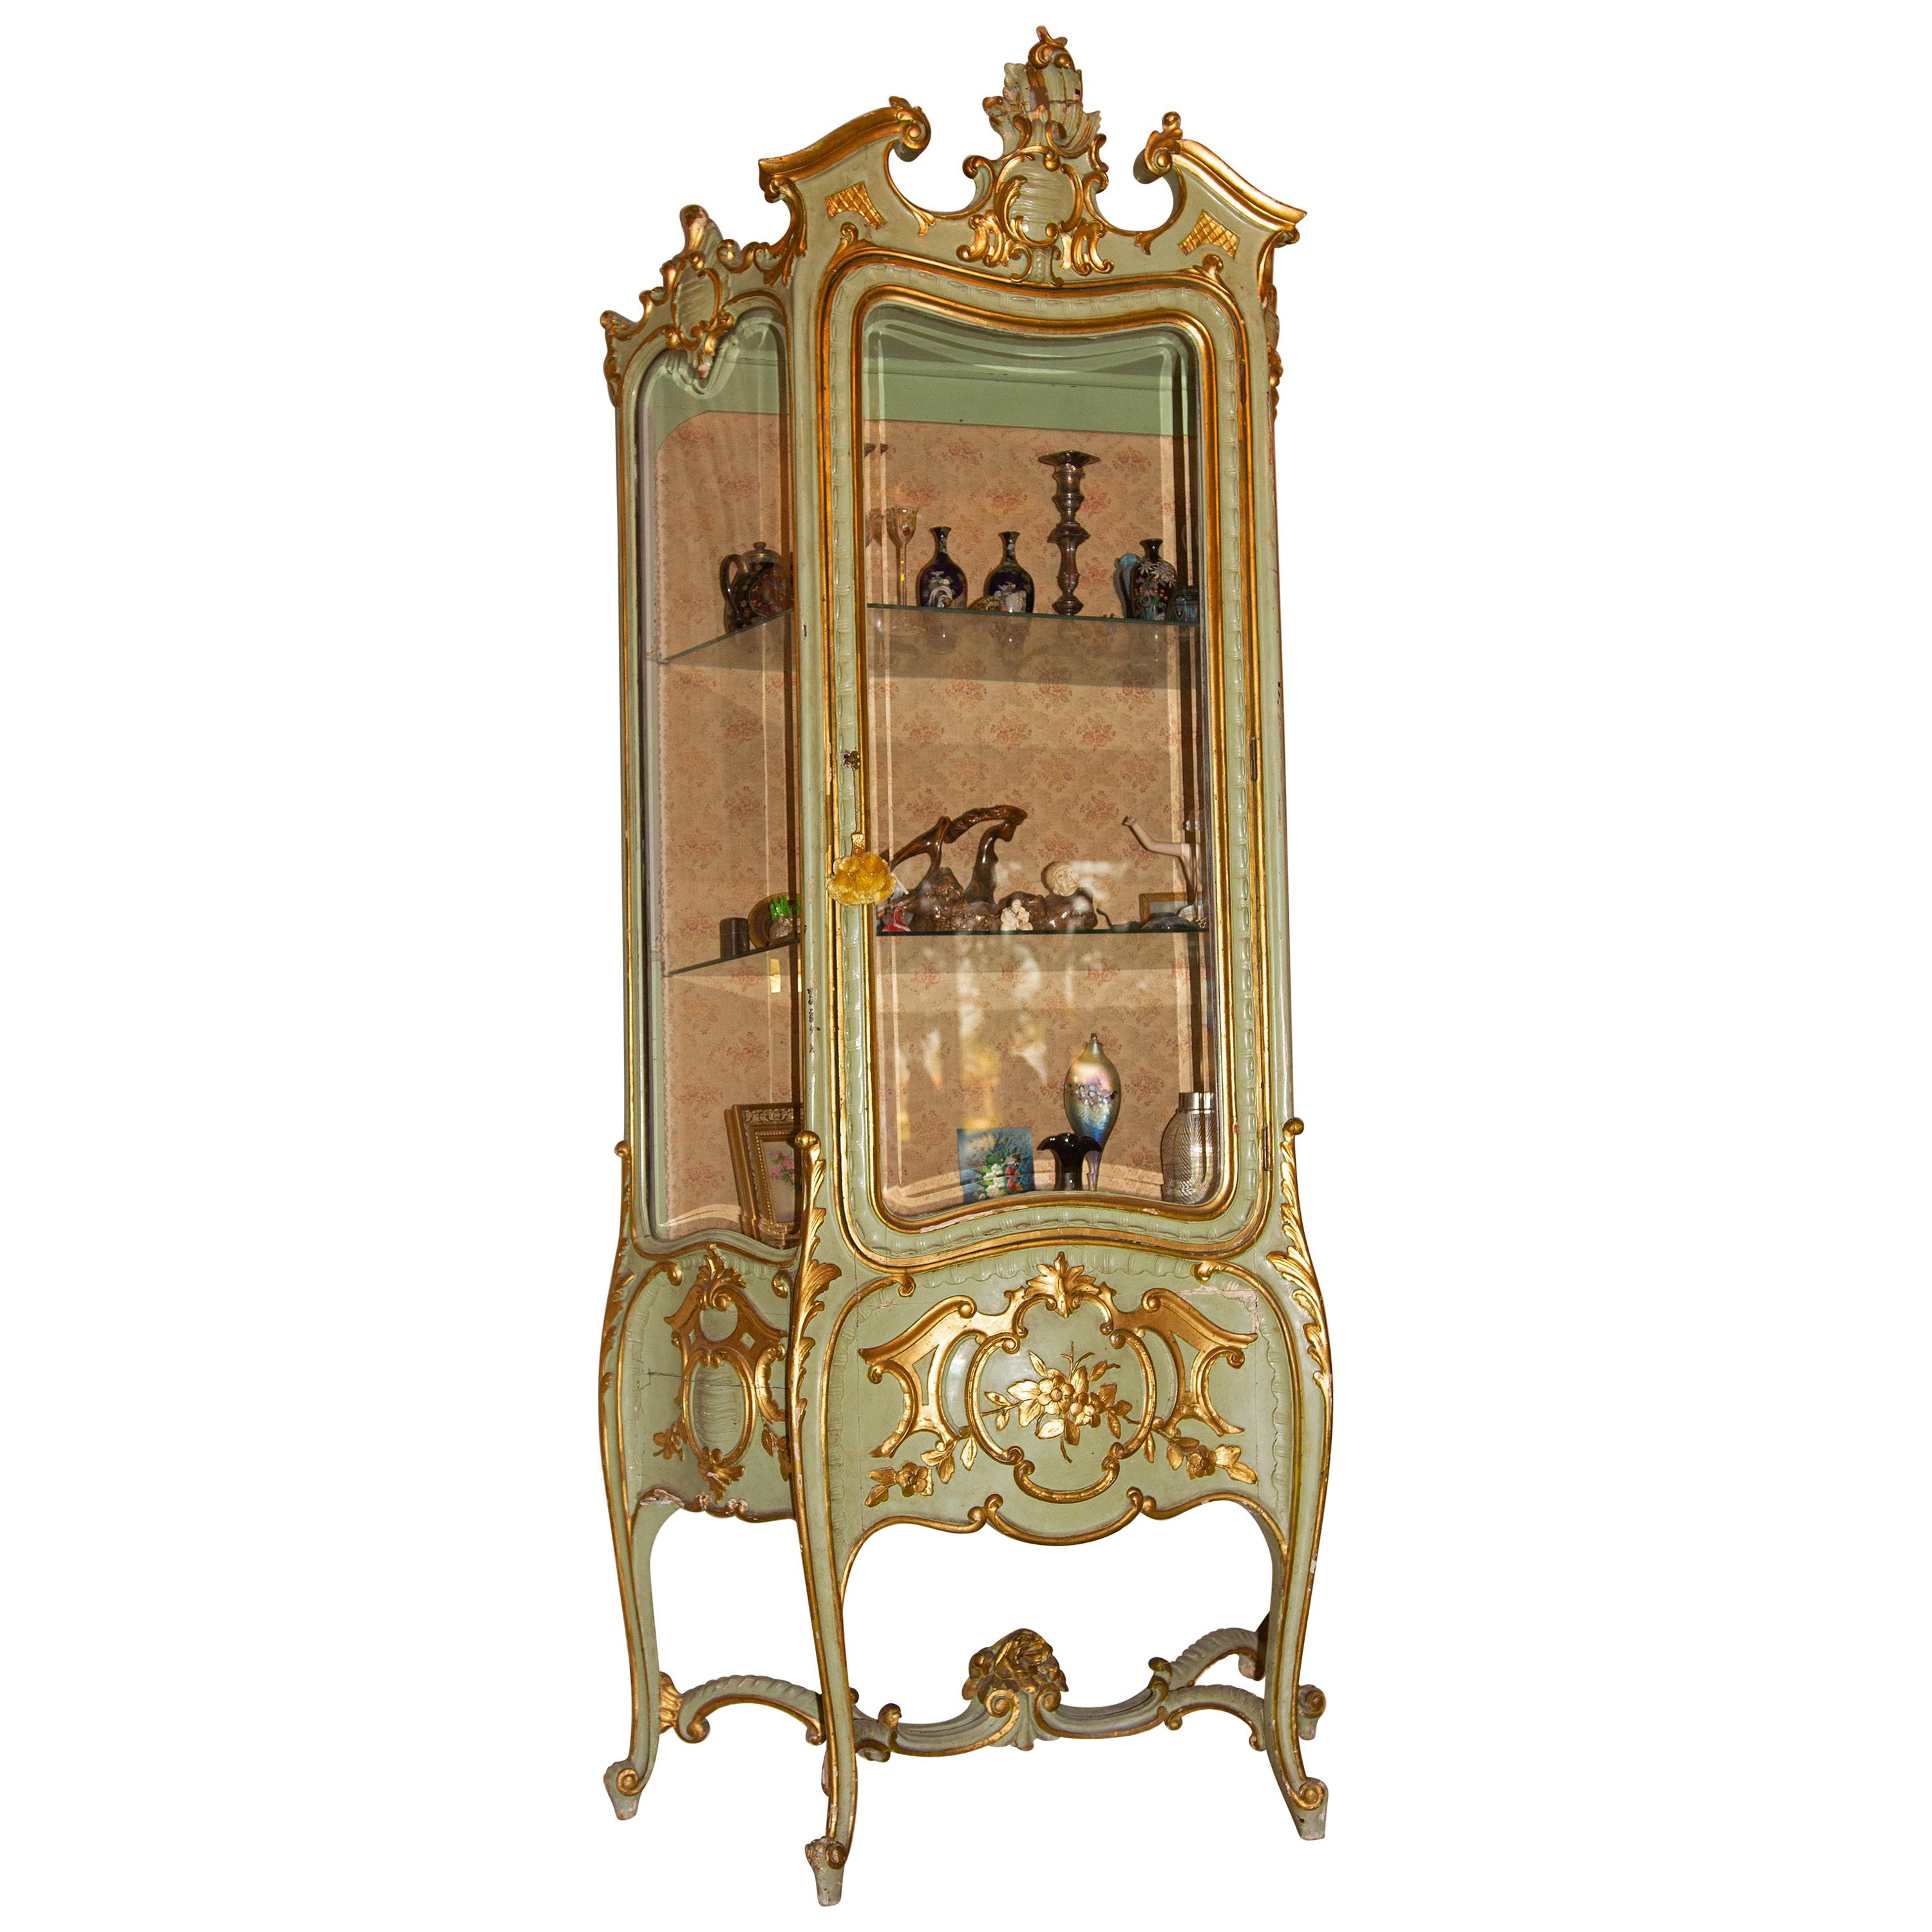 19th century Italian painted parcel-gilt beveled glass curio cabinet. Carved wood. Louis XVI style. One of several items we are selling from a living estate.
 